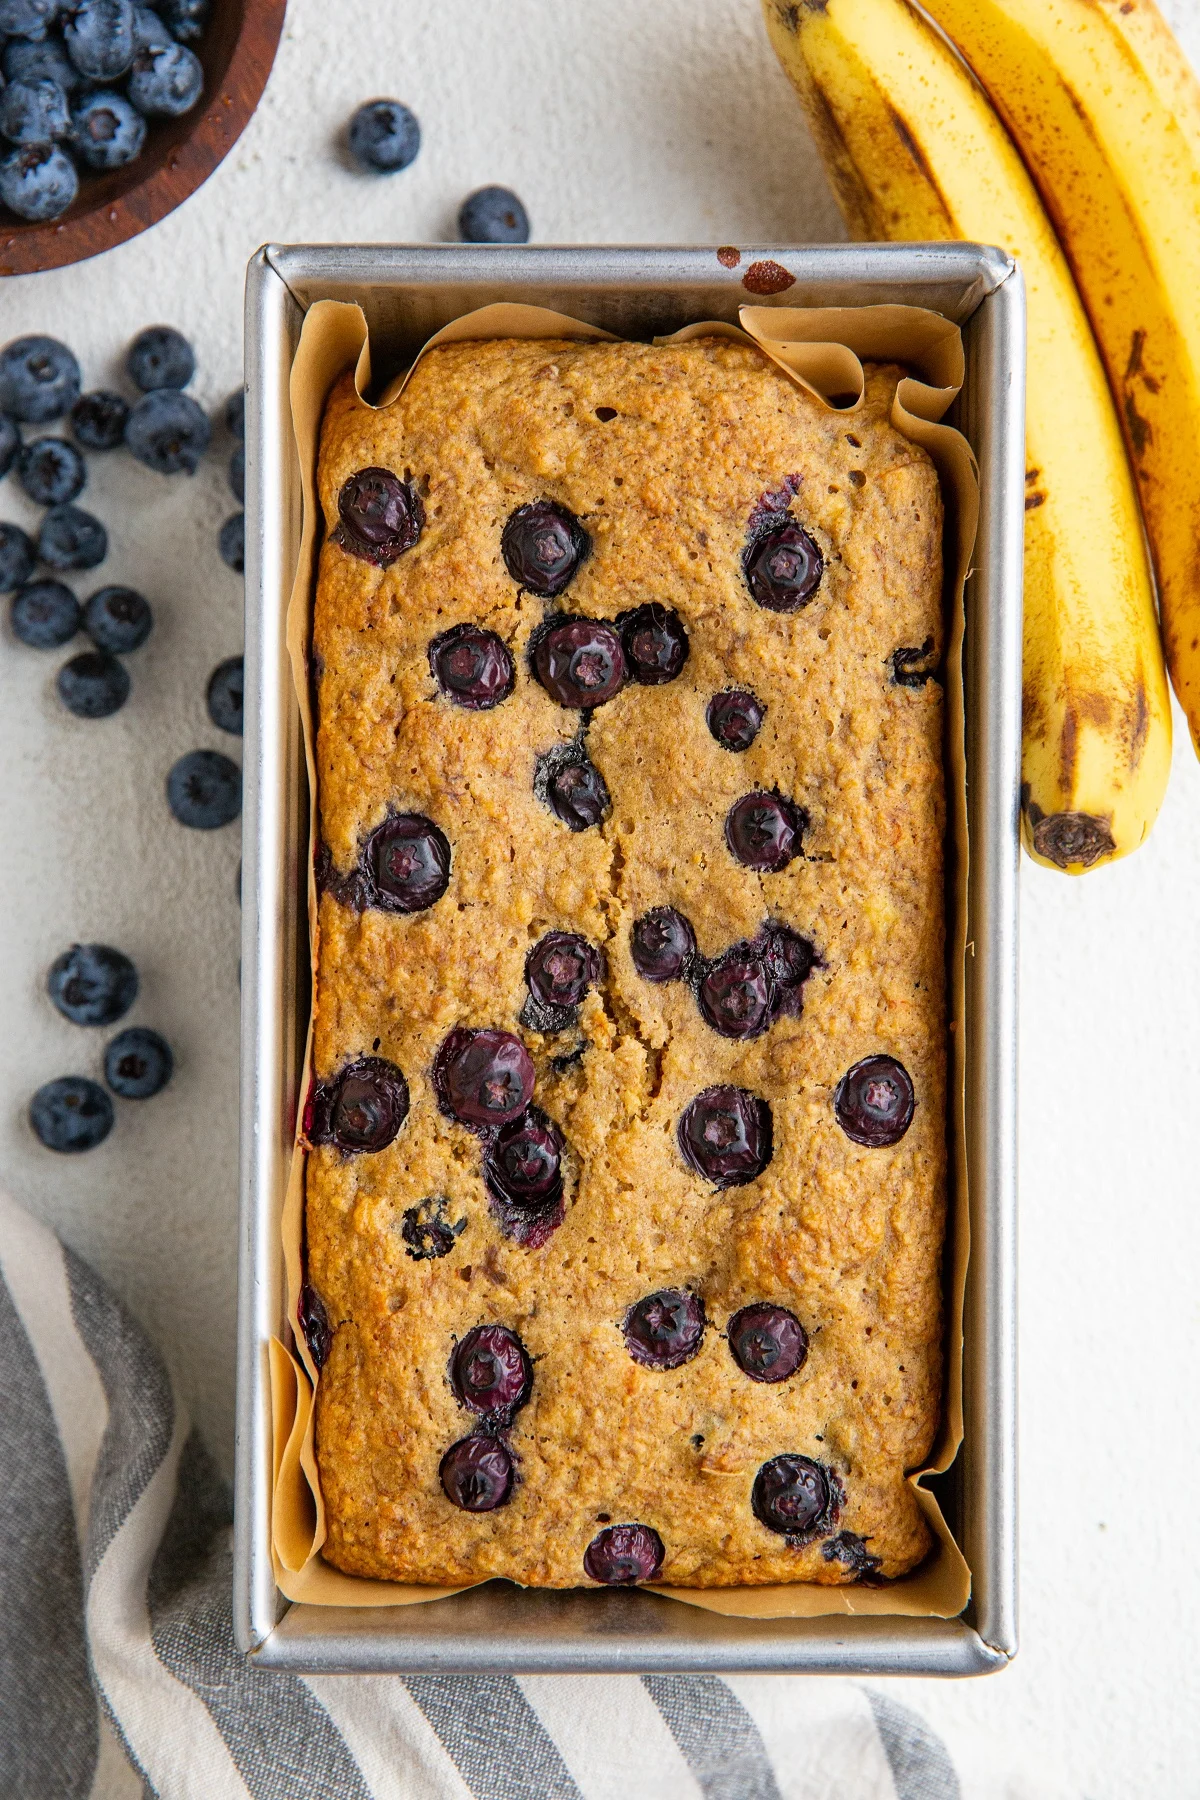 Loaf of blueberry oatmeal bread in a bread loaf pan with ripe bananas and blueberries to the side.